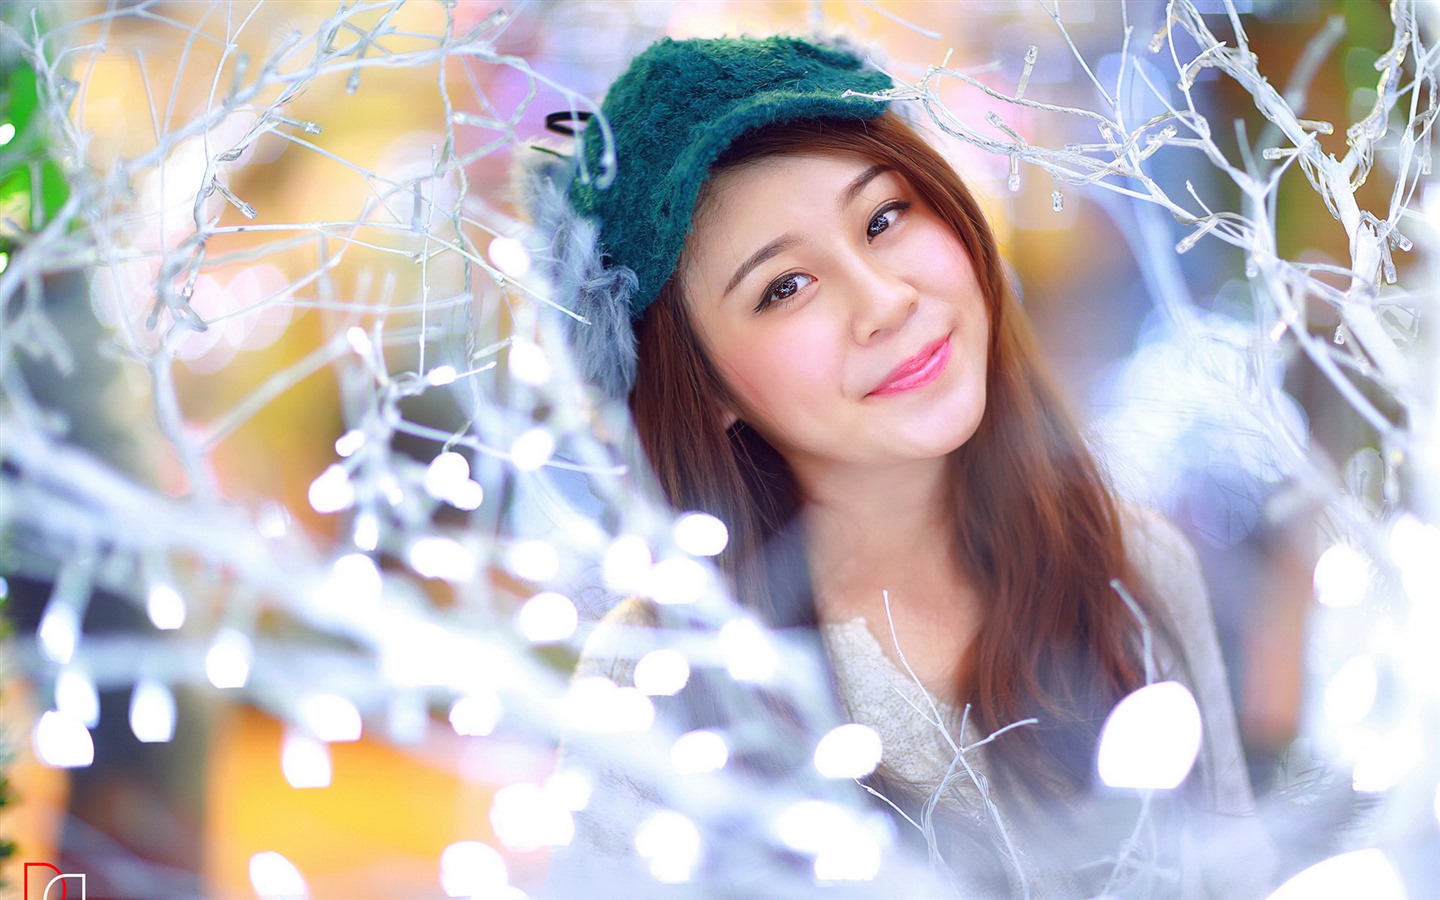 Pure and lovely young Asian girl HD wallpapers collection (4) #15 - 1440x900